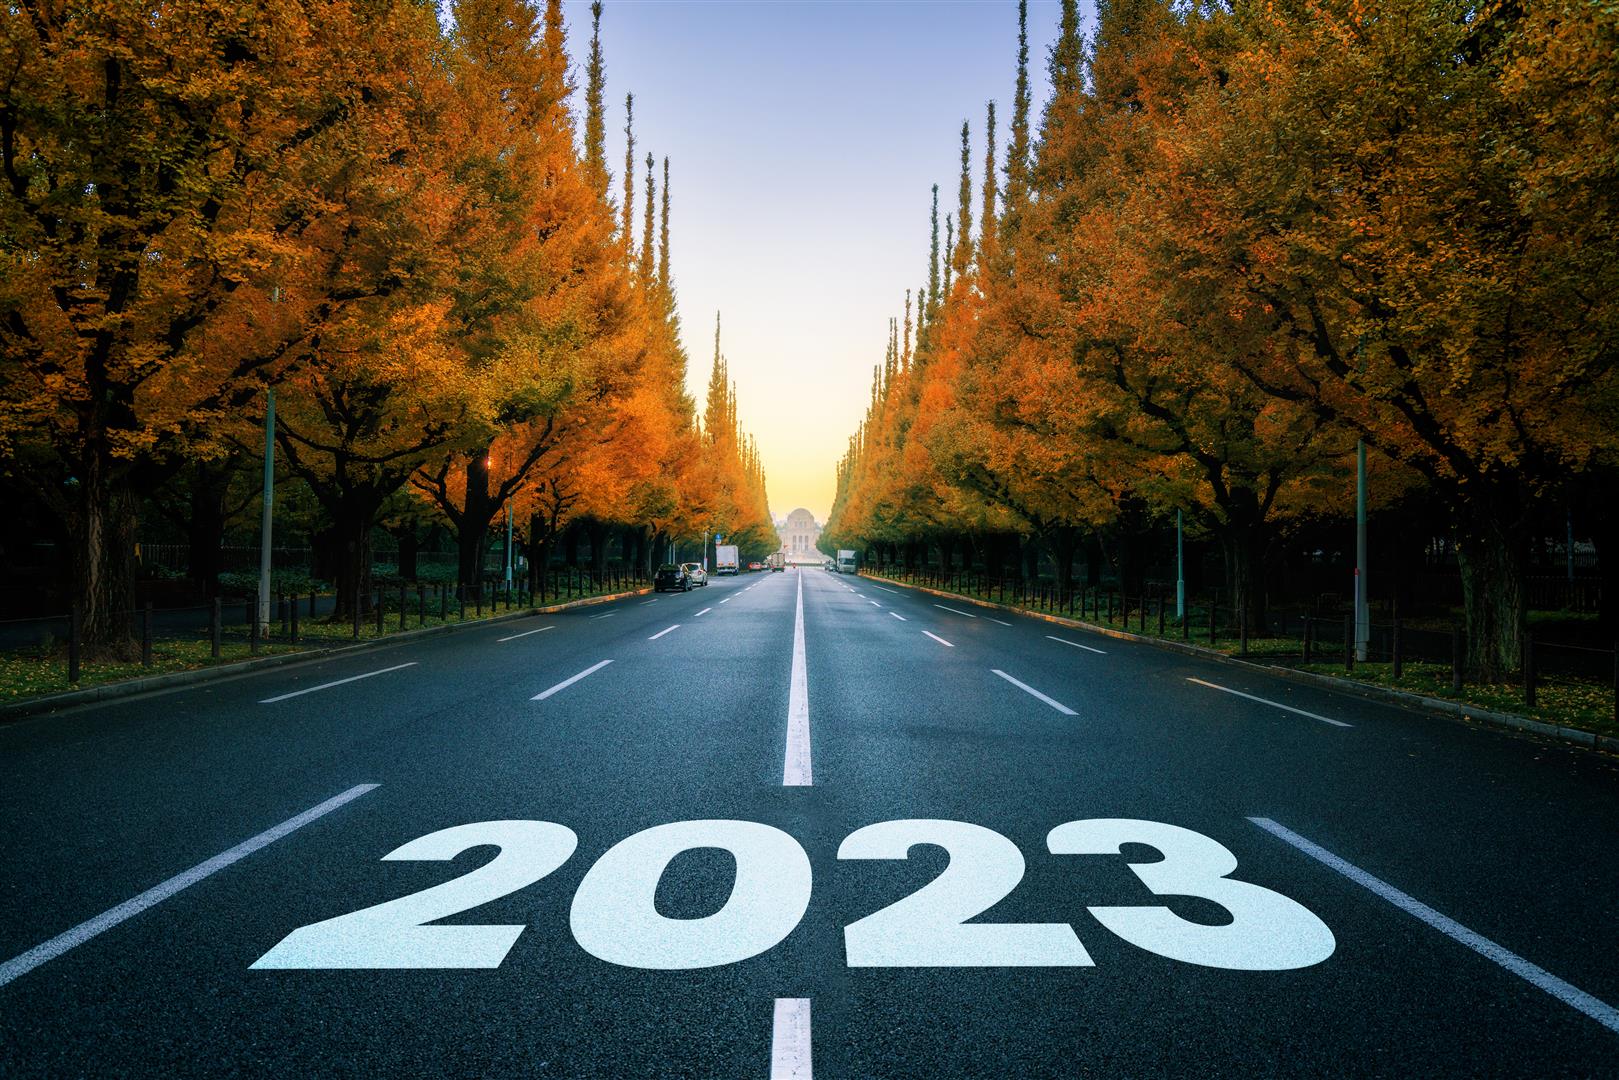 Automotive Repair Industry Trends: What to Look for in 2023